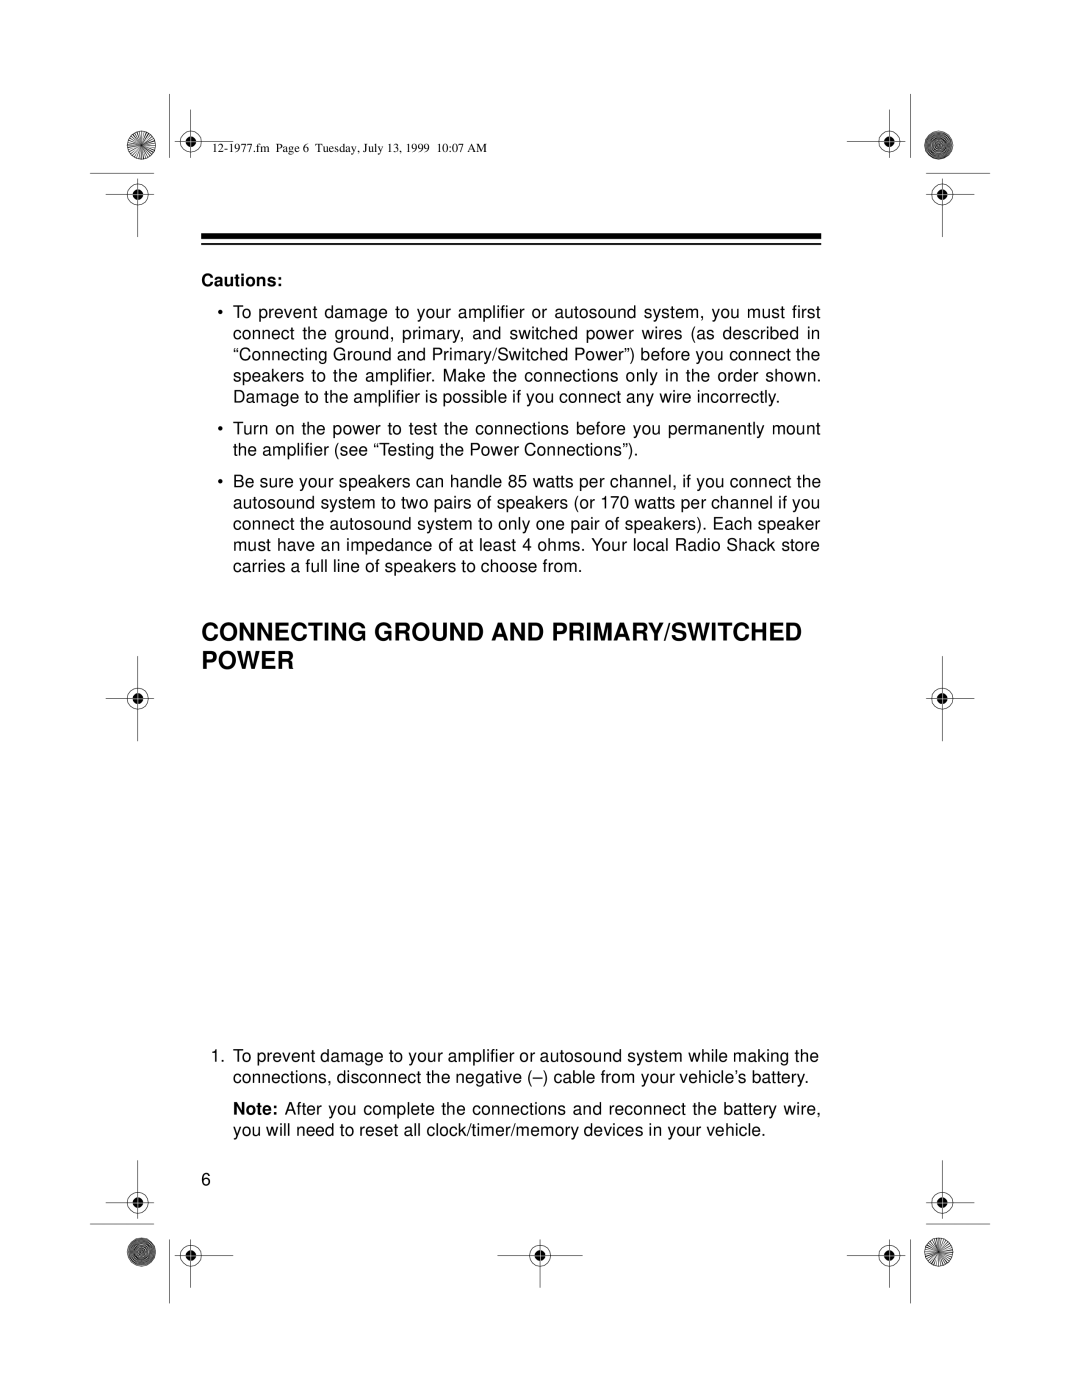 Radio Shack 85 owner manual Connecting Ground And Primary/Switched Power, Cautions 